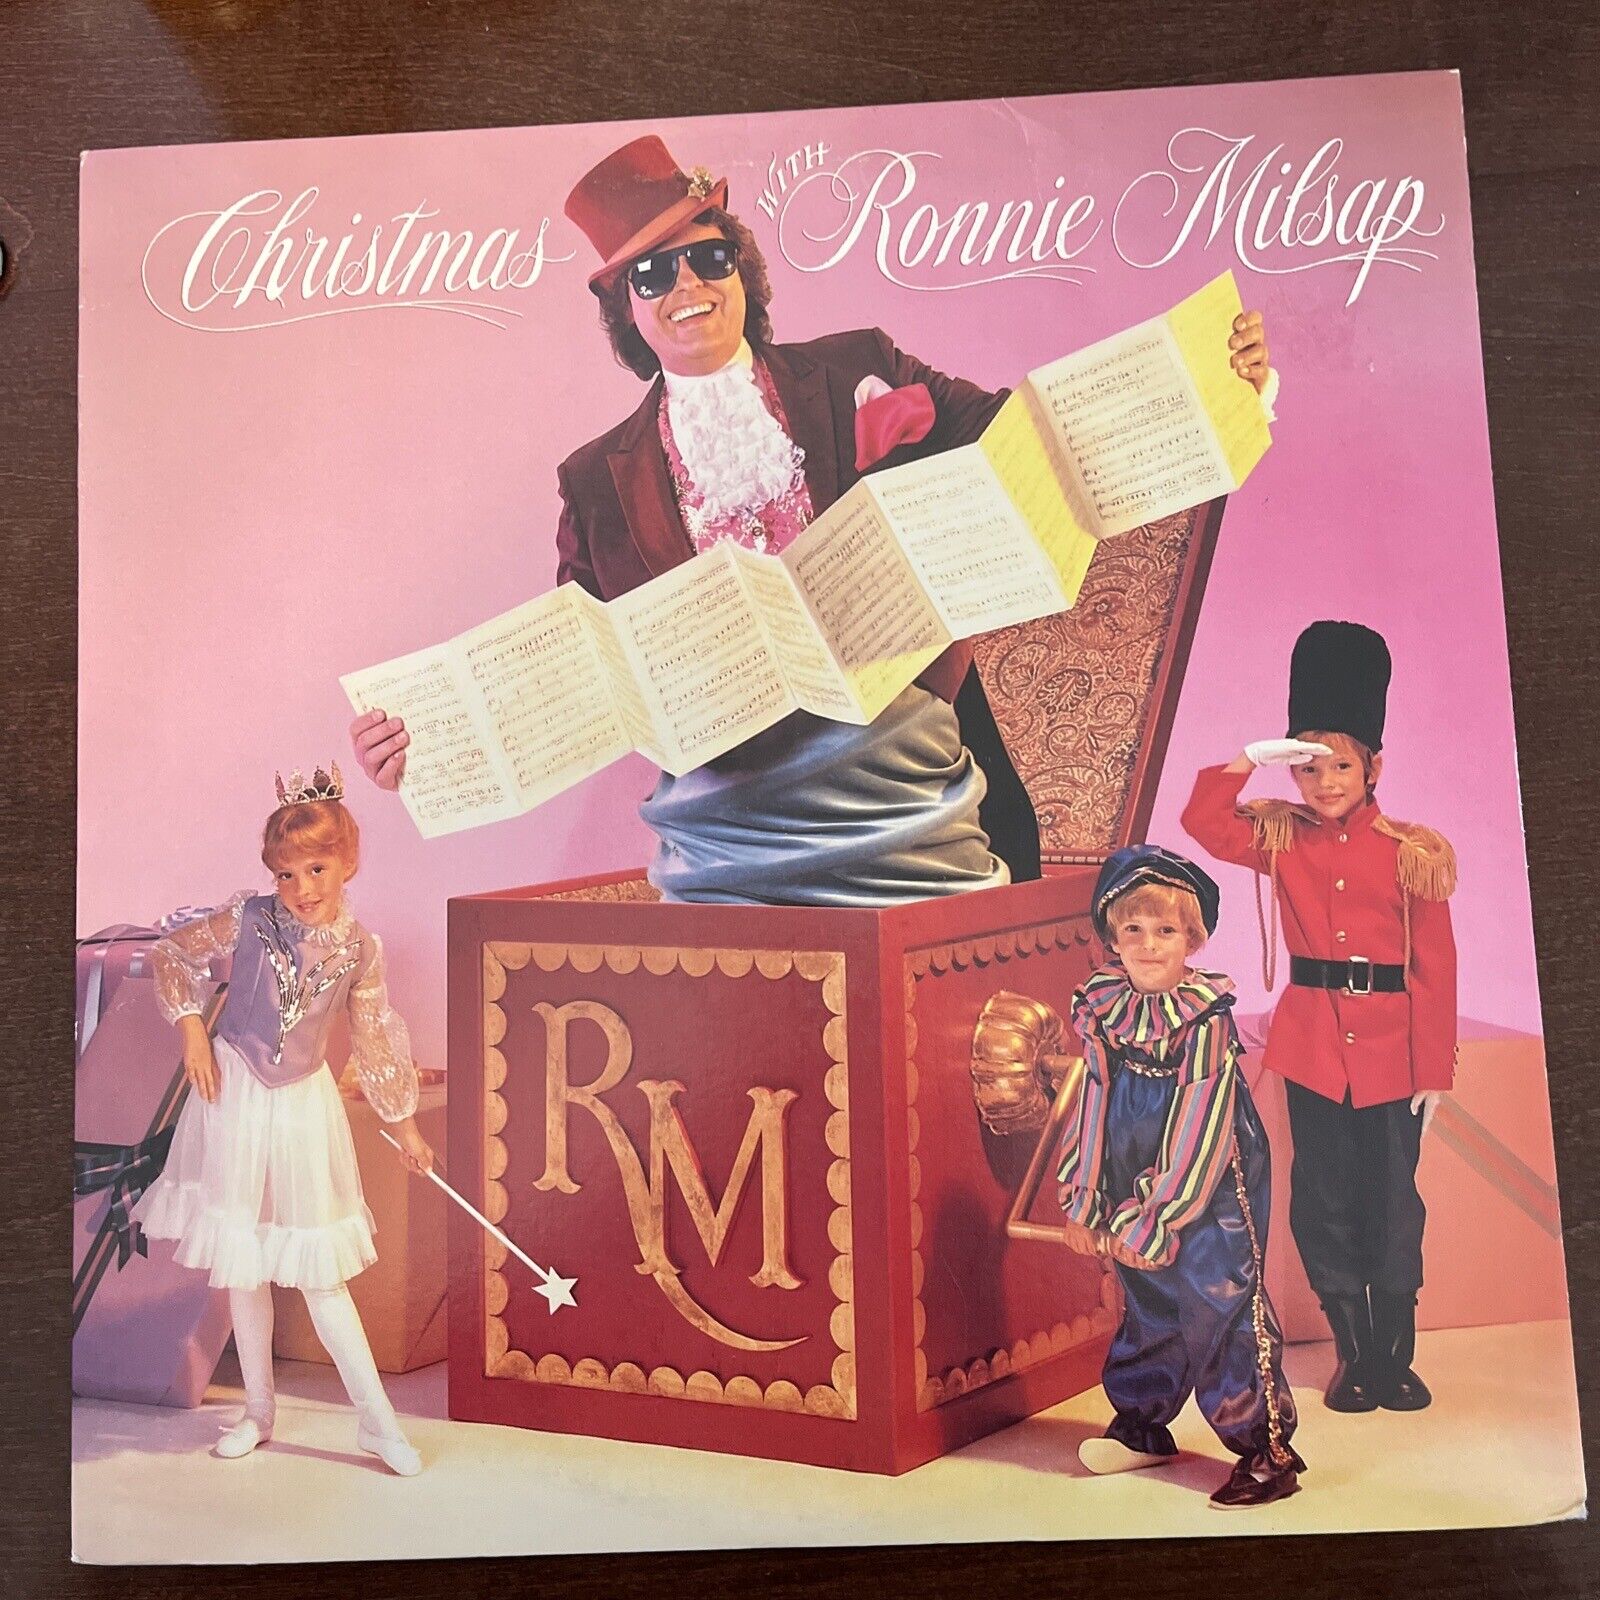 Christmas With Ronniemilsap Vinyl 